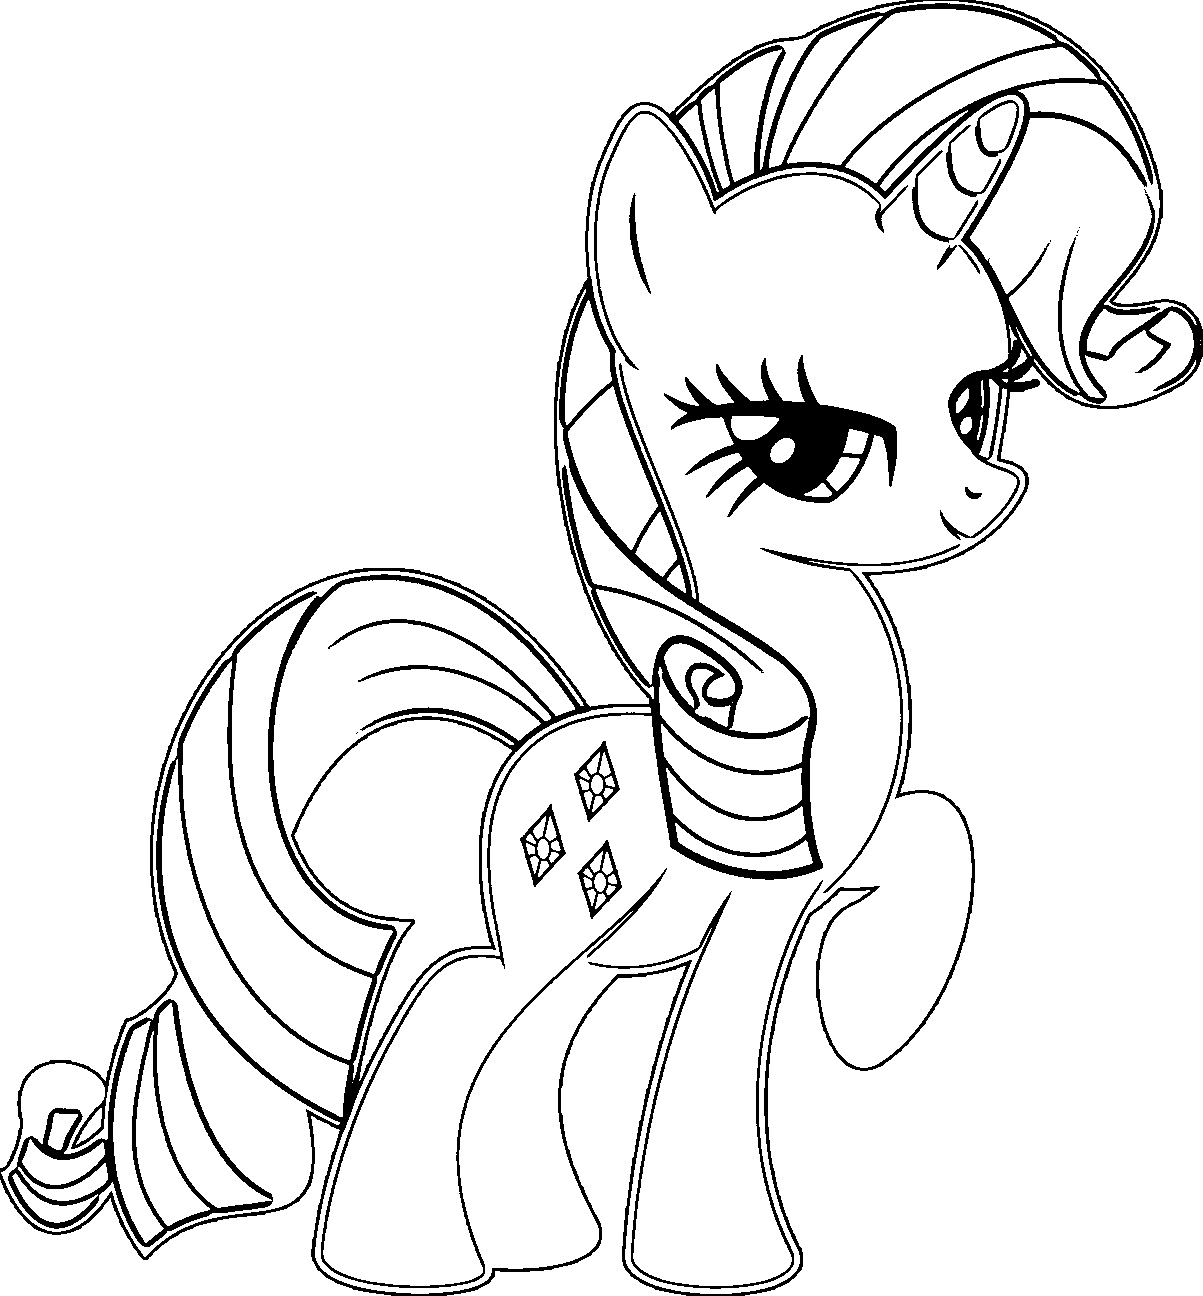 Mlp Rarity Coloring Page | Wecoloringpage